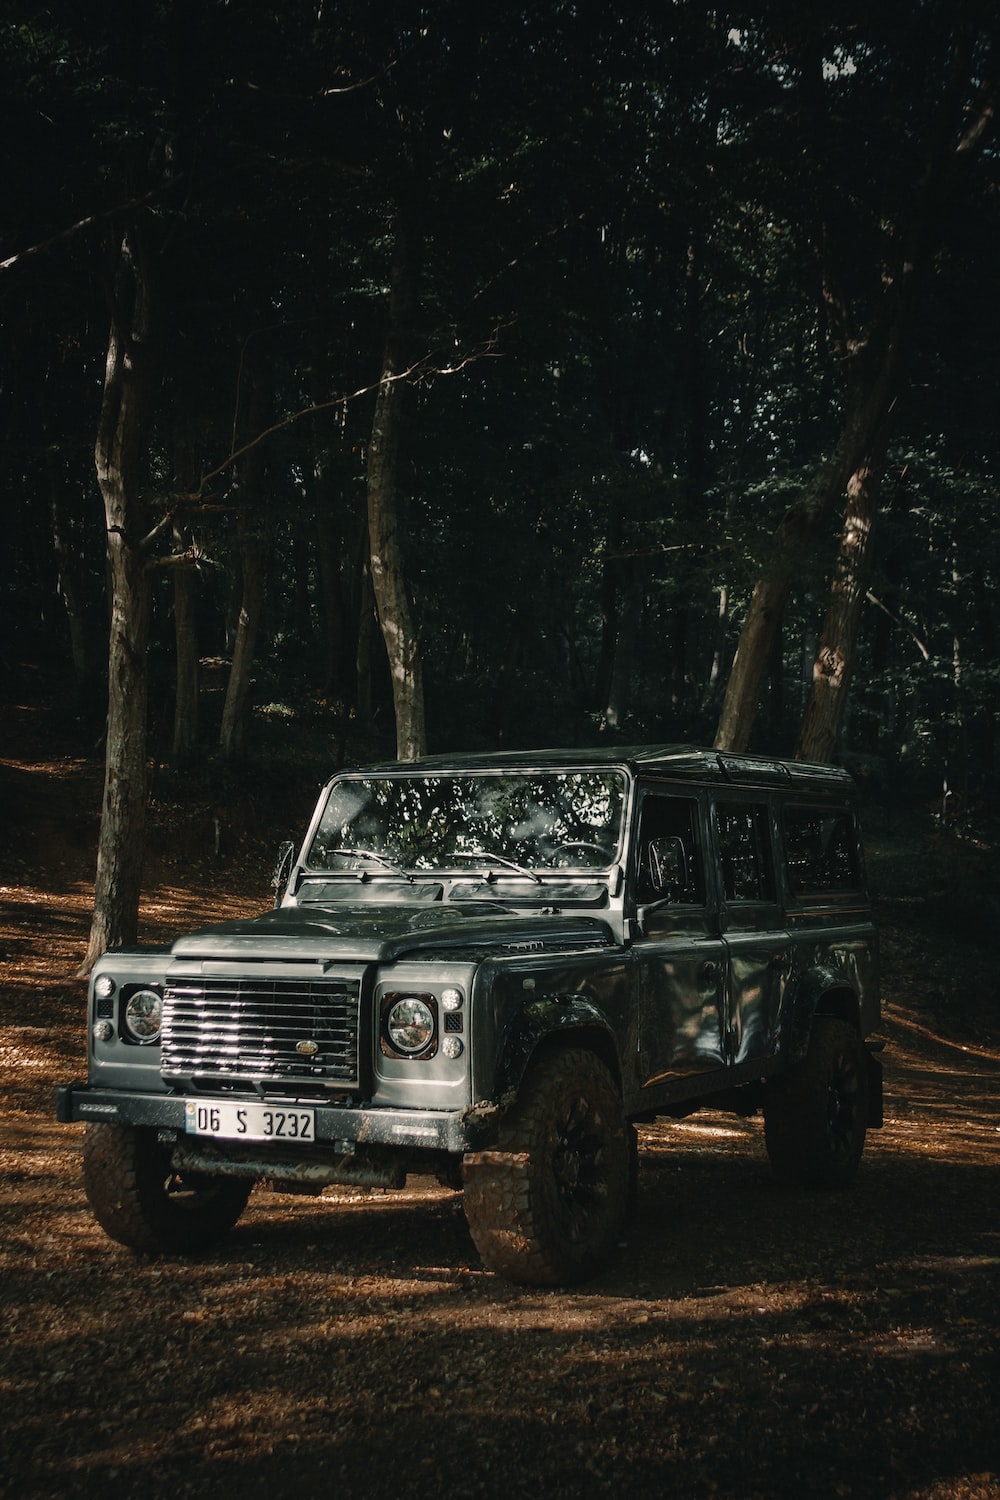 Defender Picture. Download Free Image